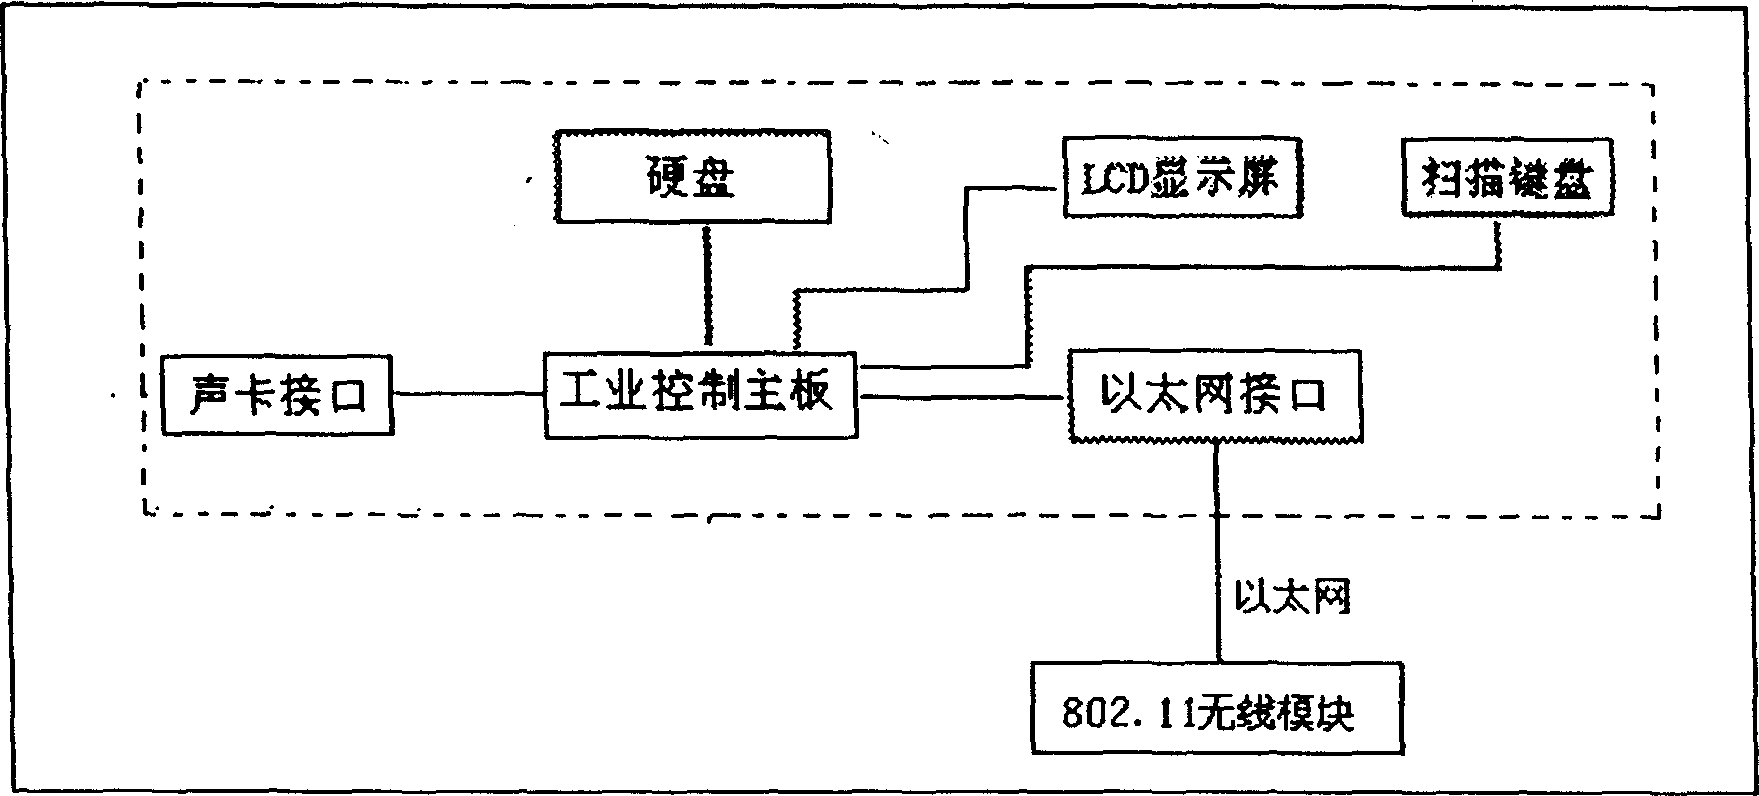 Control method and system for igniting fireworks